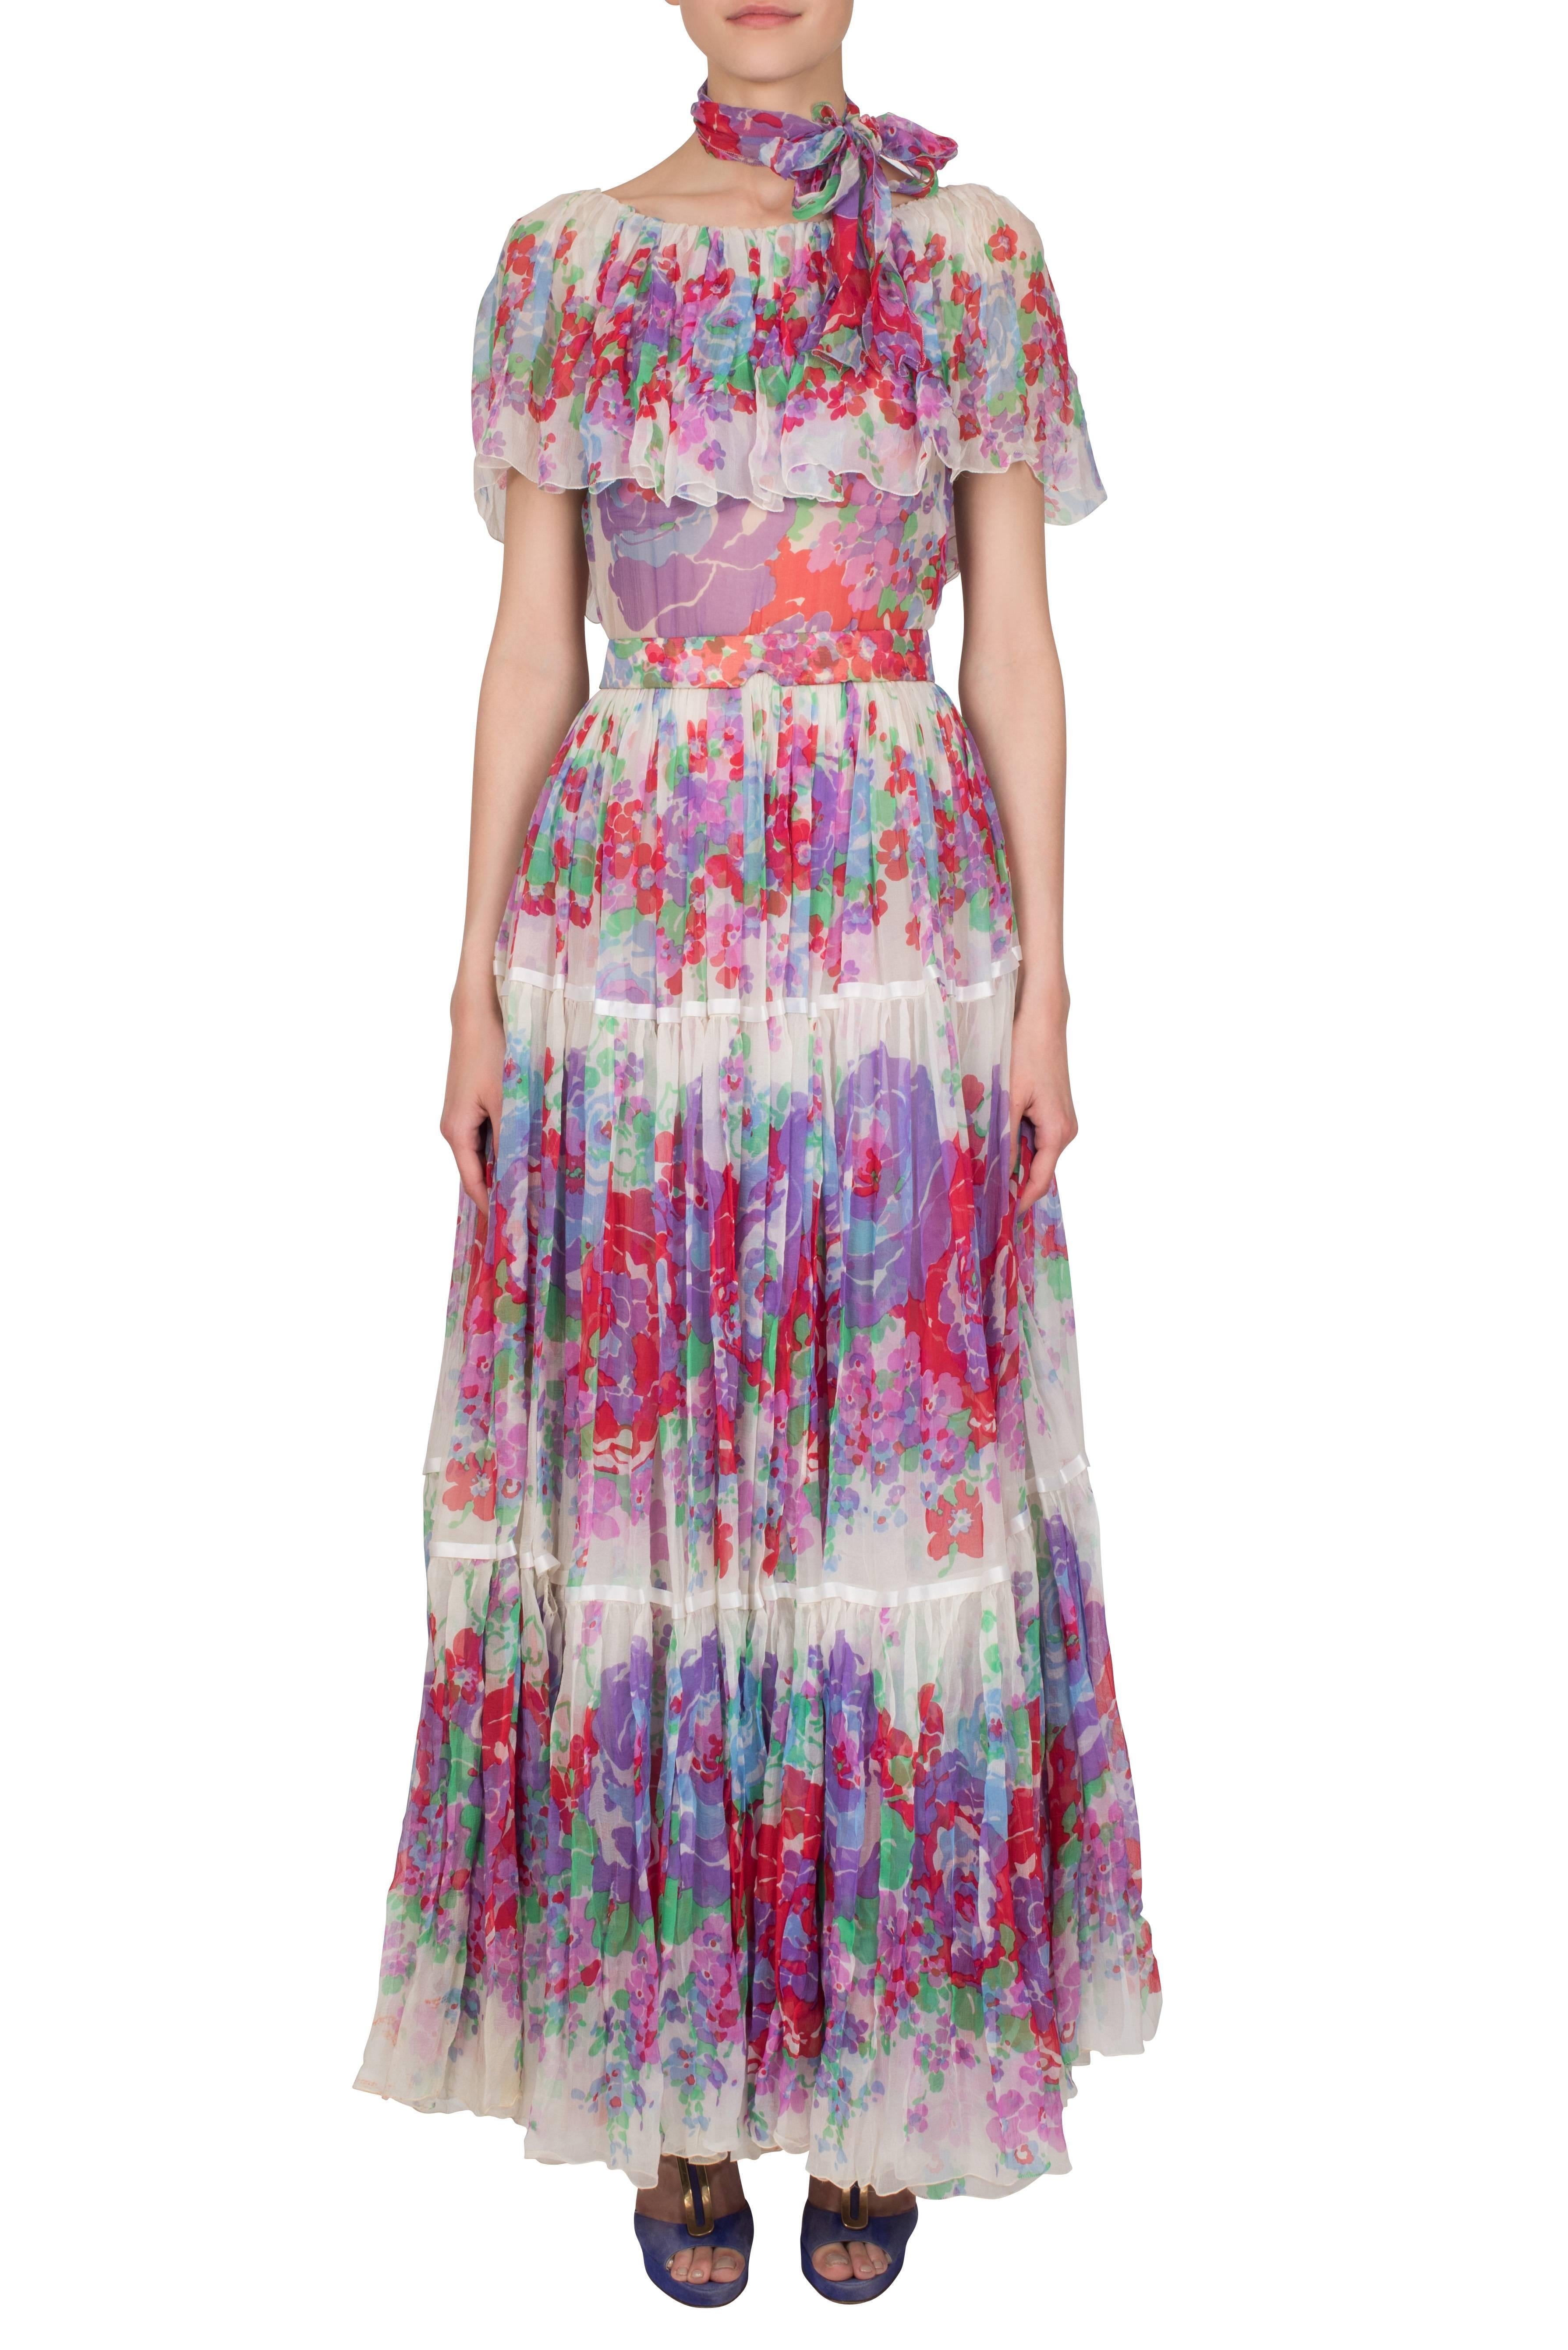 A sheer ivory chiffon maxi dress by London couturier Harald which features a delicate lilac, pink, red, blue and green watercolour floral print. The dress features a pleated and tiered skirt divided by two white satin ribbon trims; the lower trim